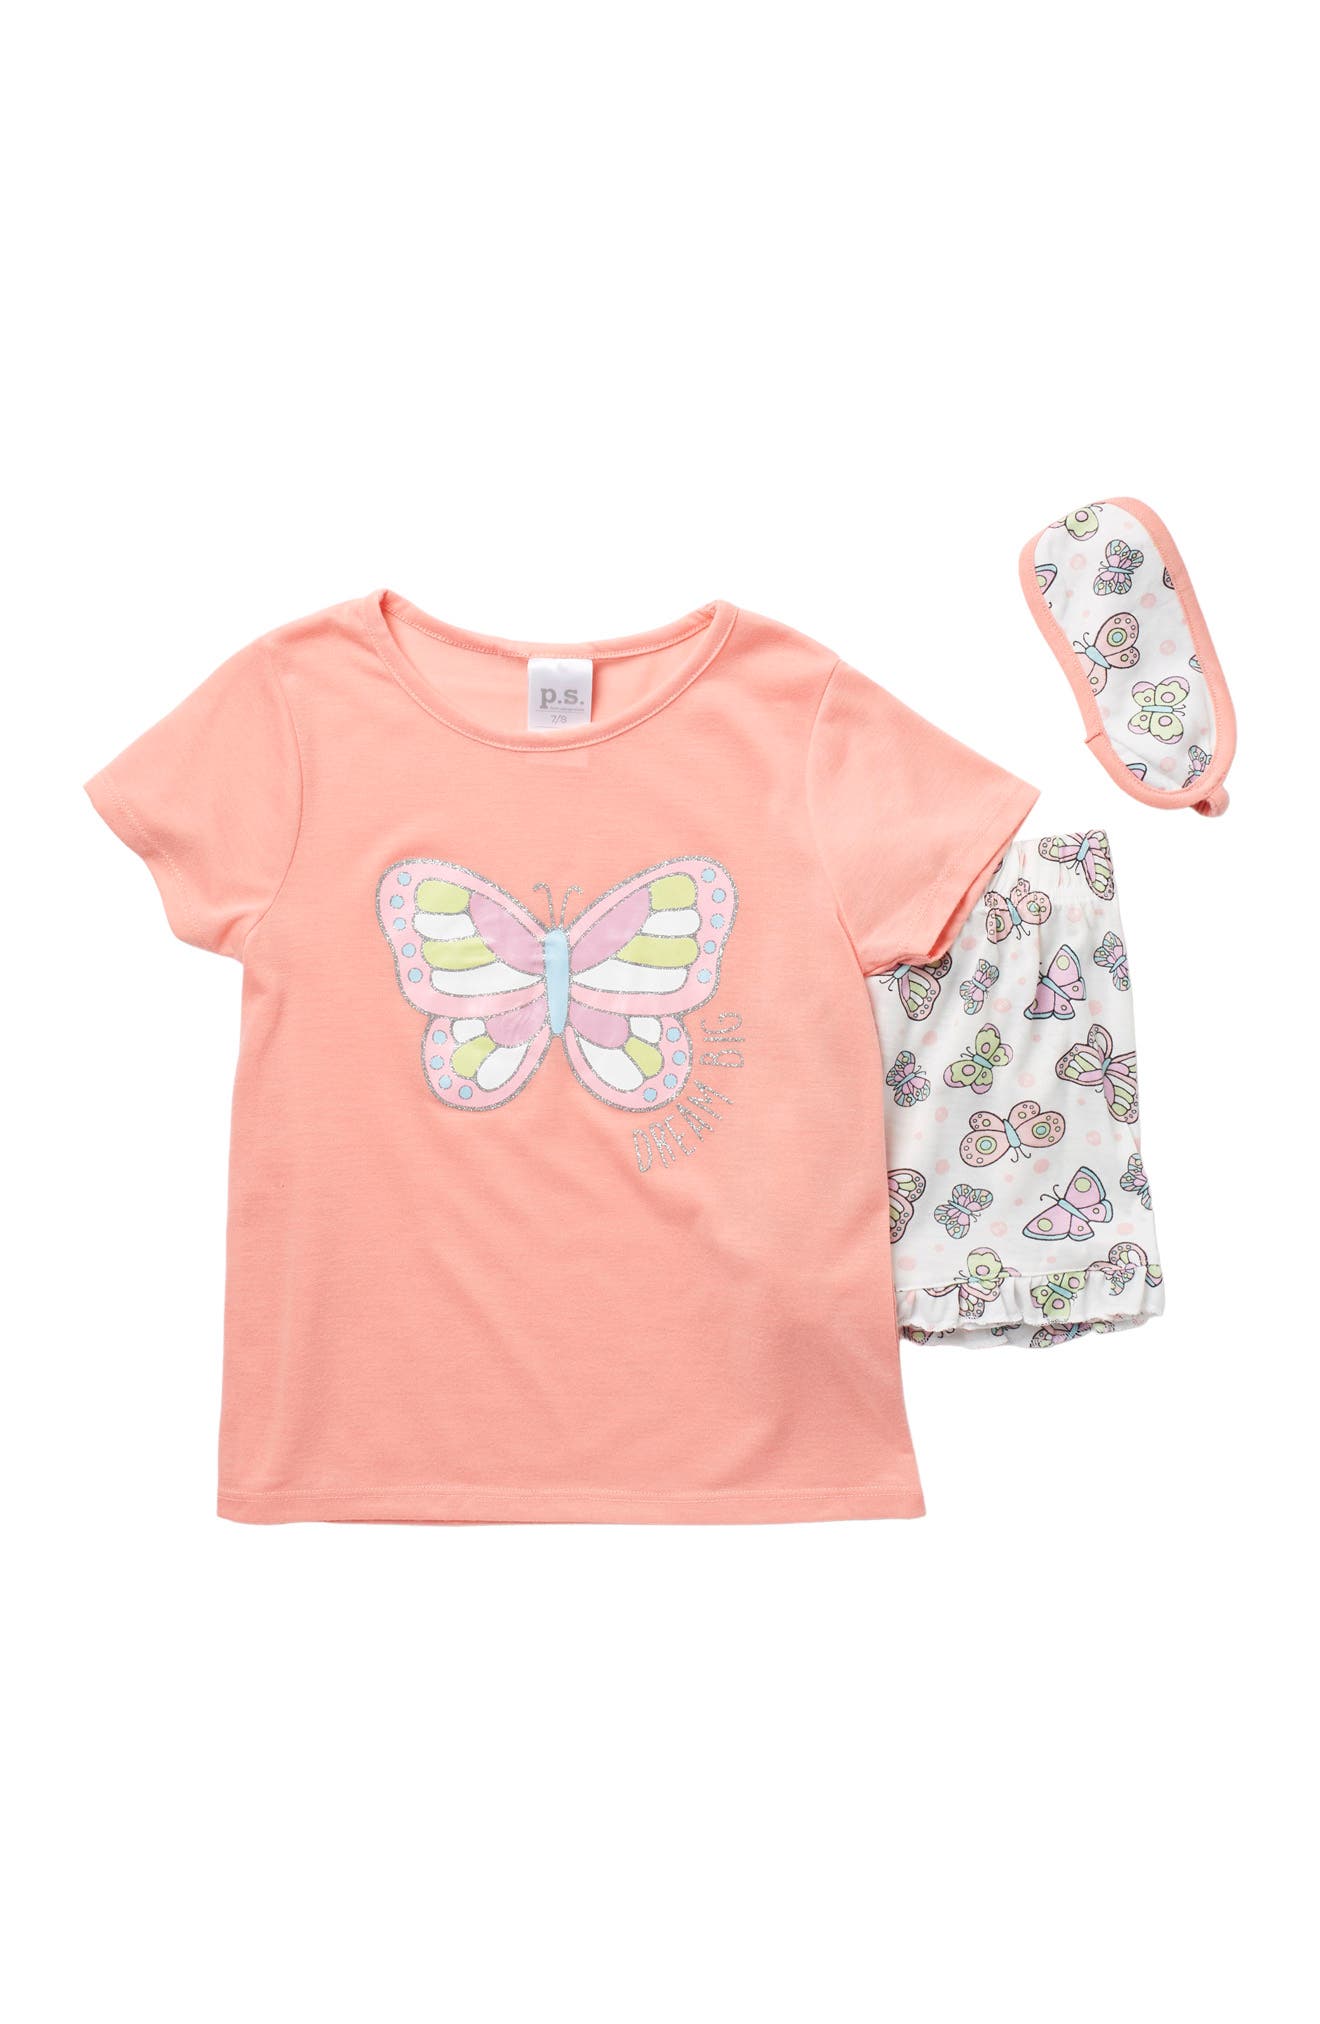 Aéropostale Kids' Butterfly T-shirt In 919 C